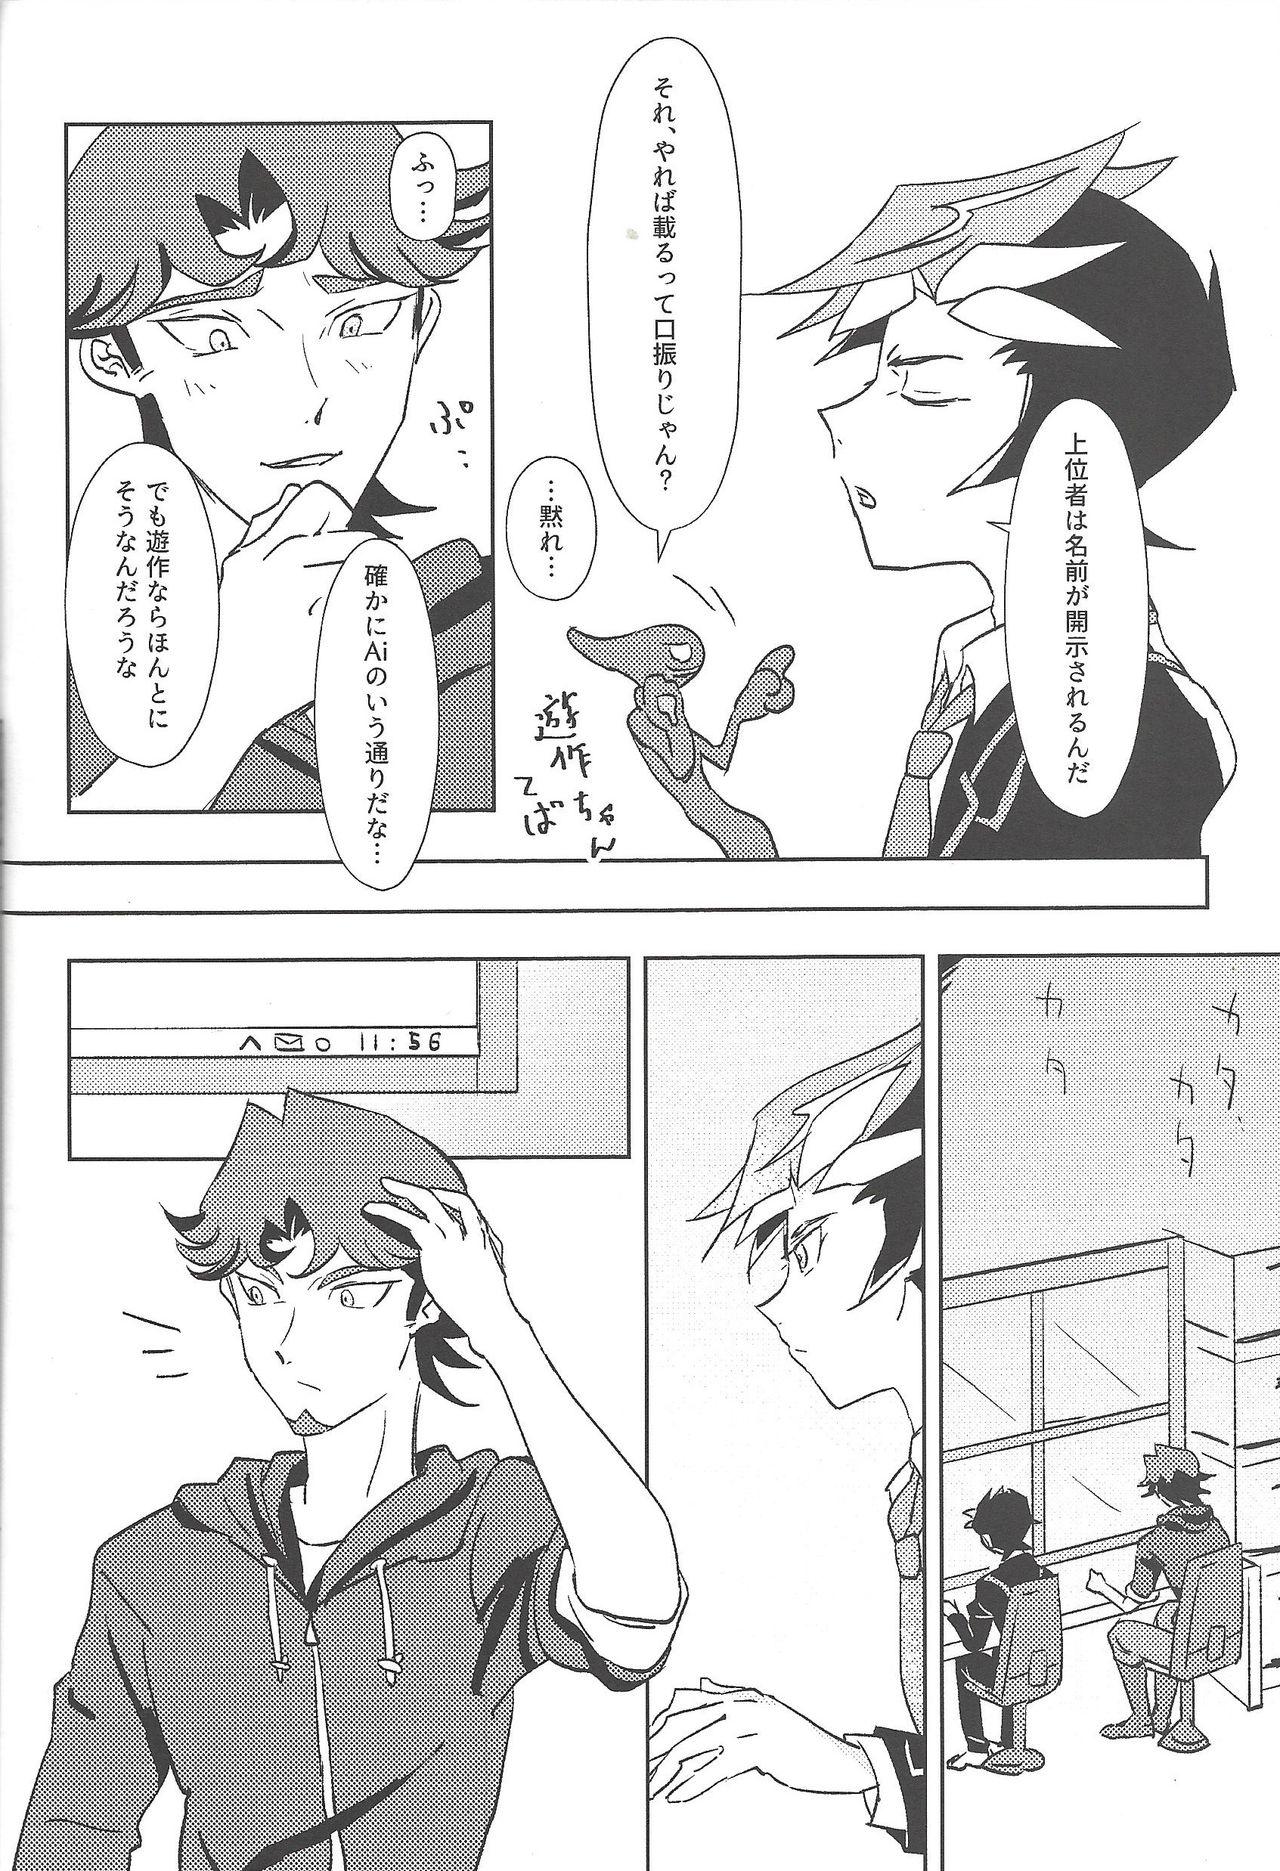 Neighbor Out of School - Yu-gi-oh vrains Comendo - Page 7